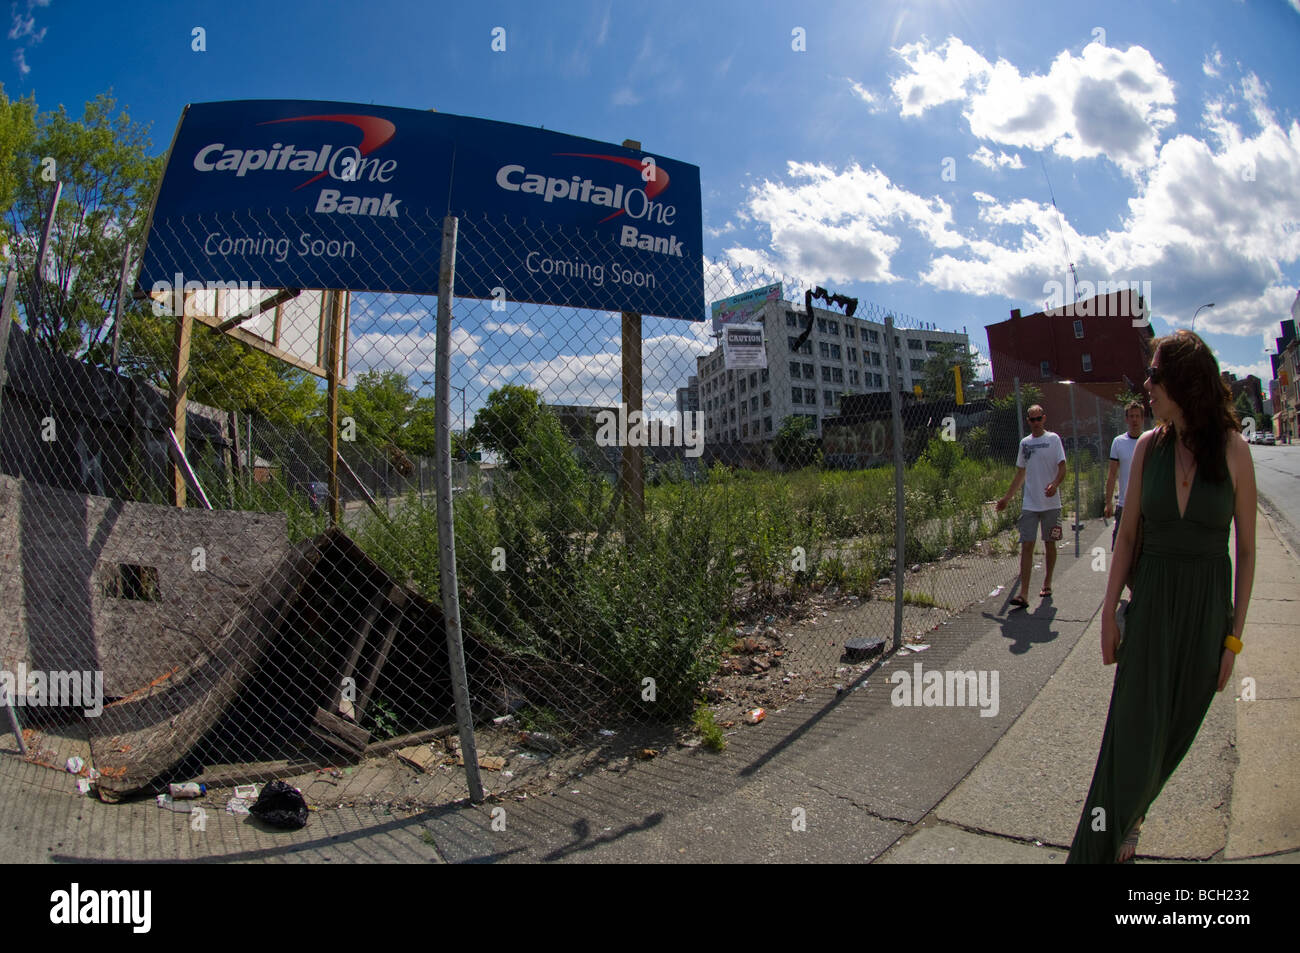 A Capital One Bank coming soon sign in an empty lot in the Brooklyn neighborhood of Williamsburg in New York Stock Photo